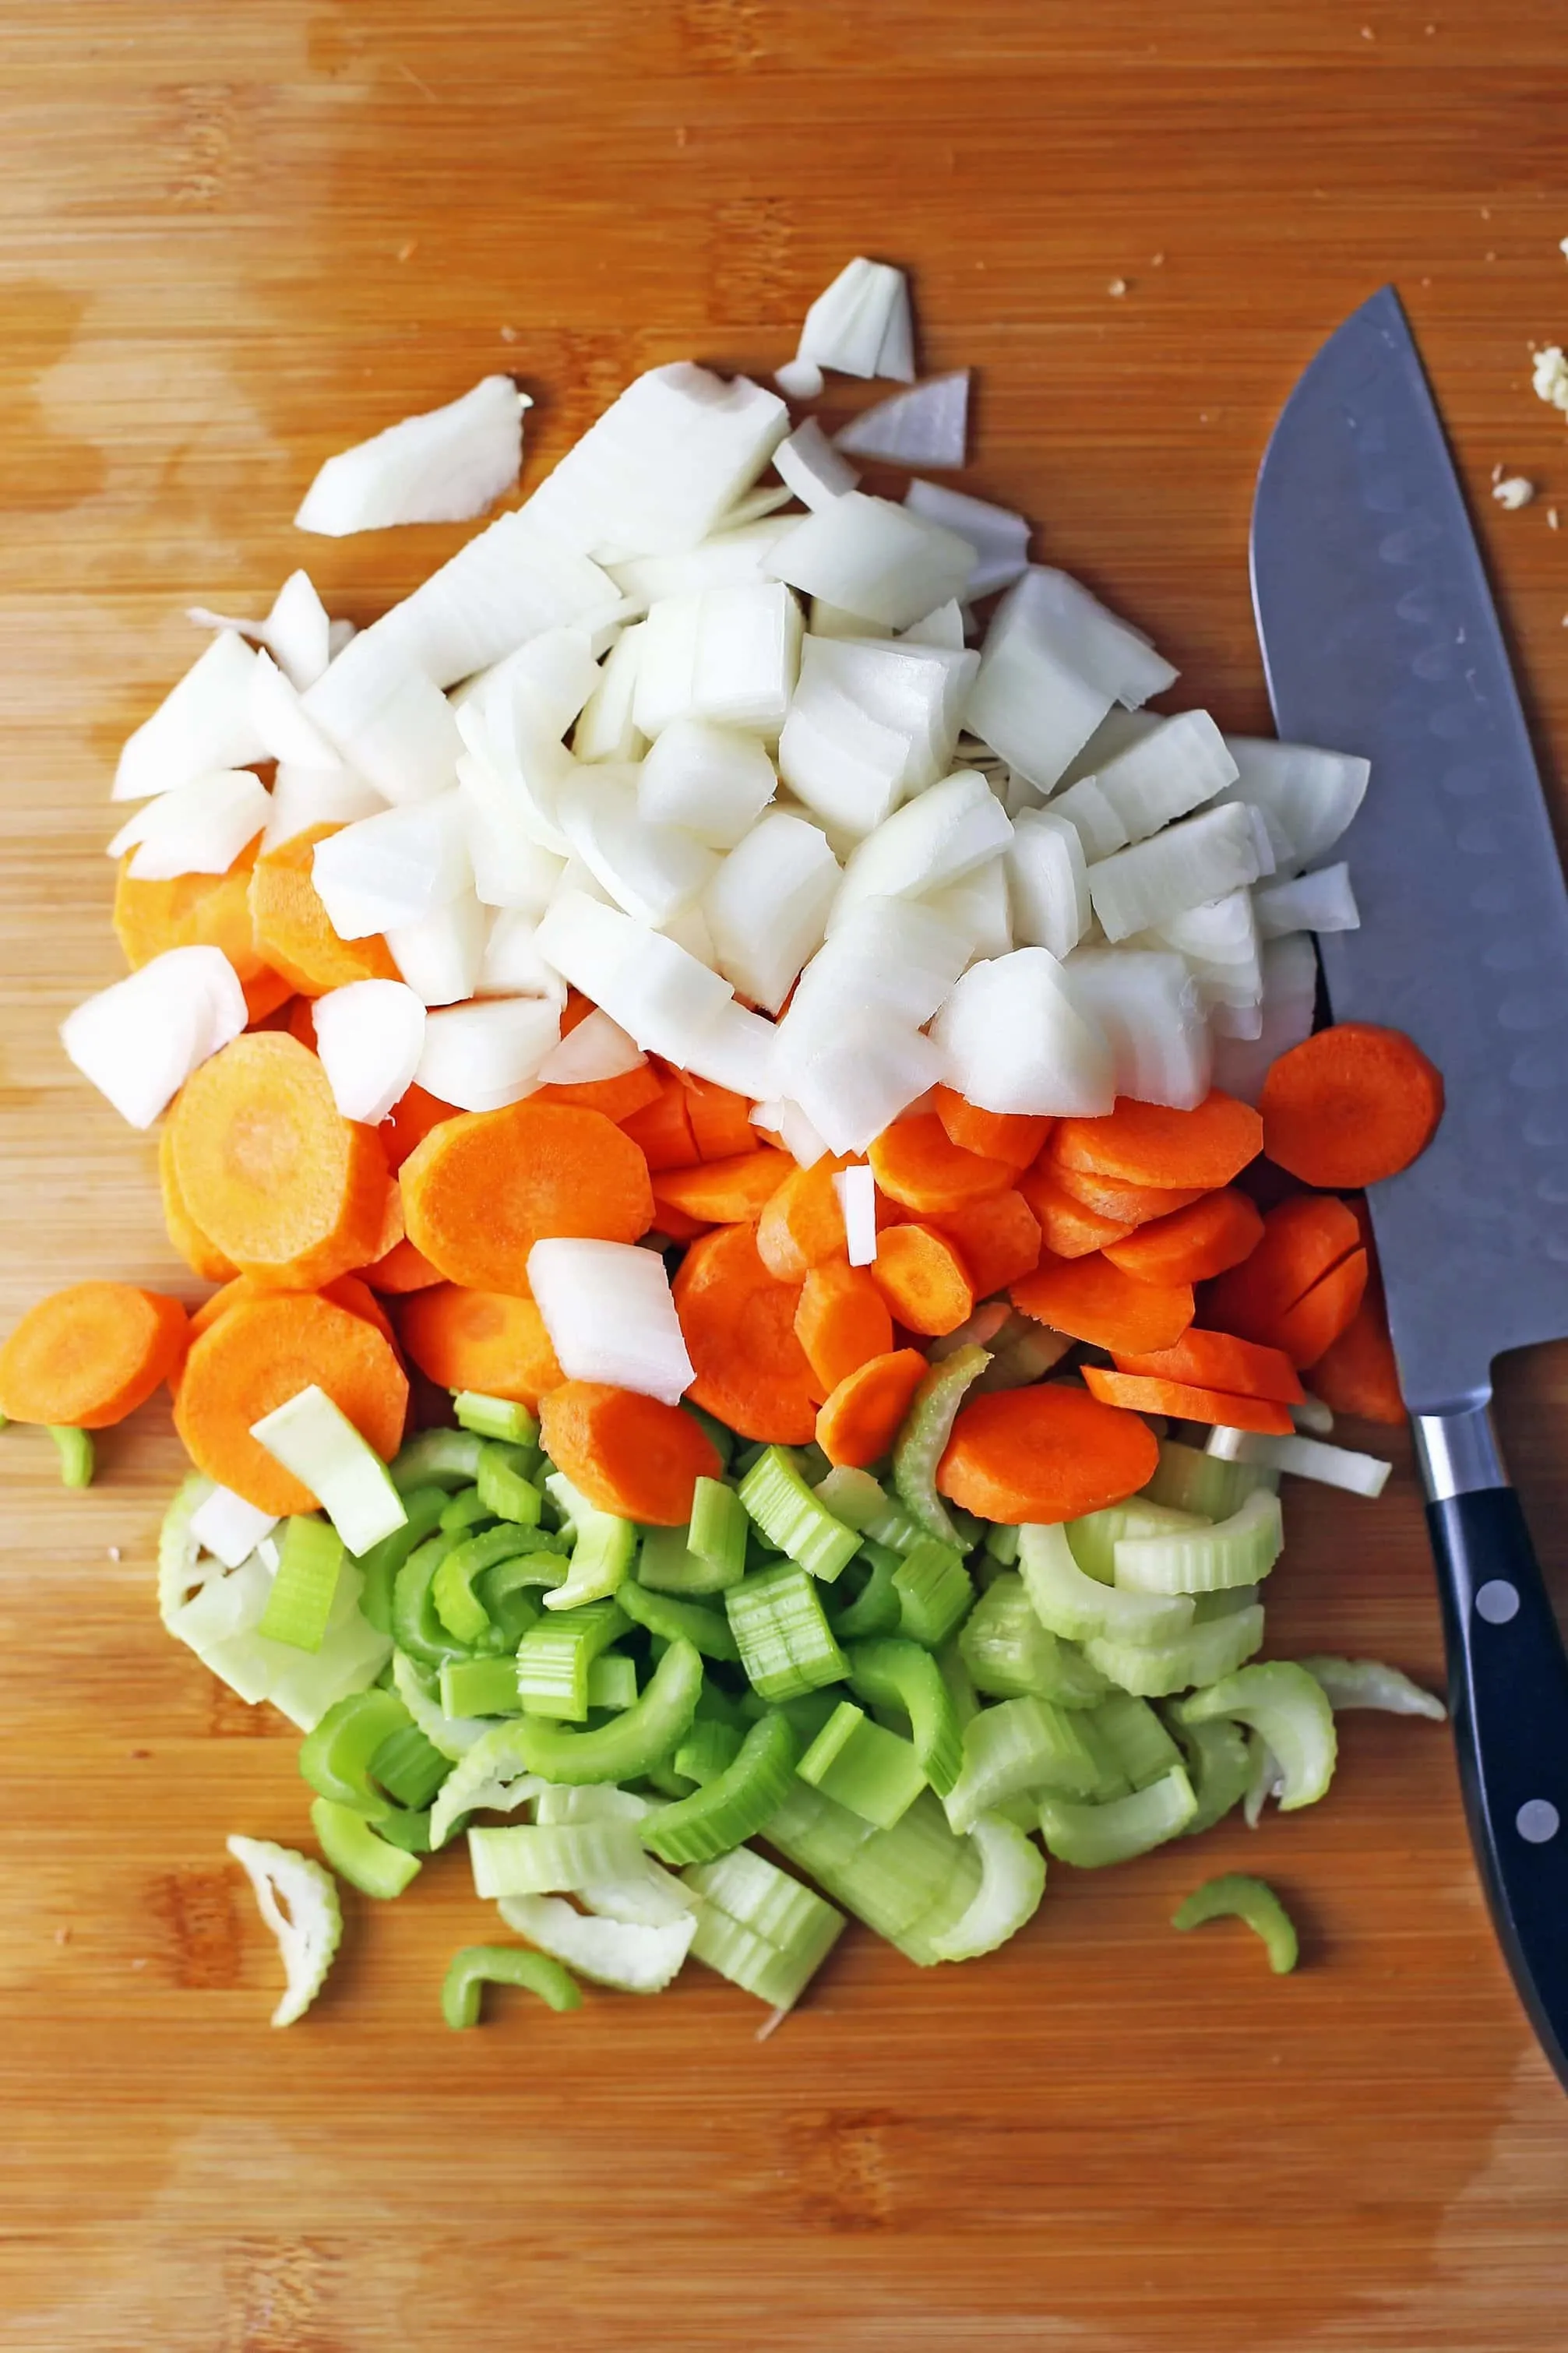 Chopped white onion, carrots, and celery on wooden cutting board with a knife on the the side of the vegetables.